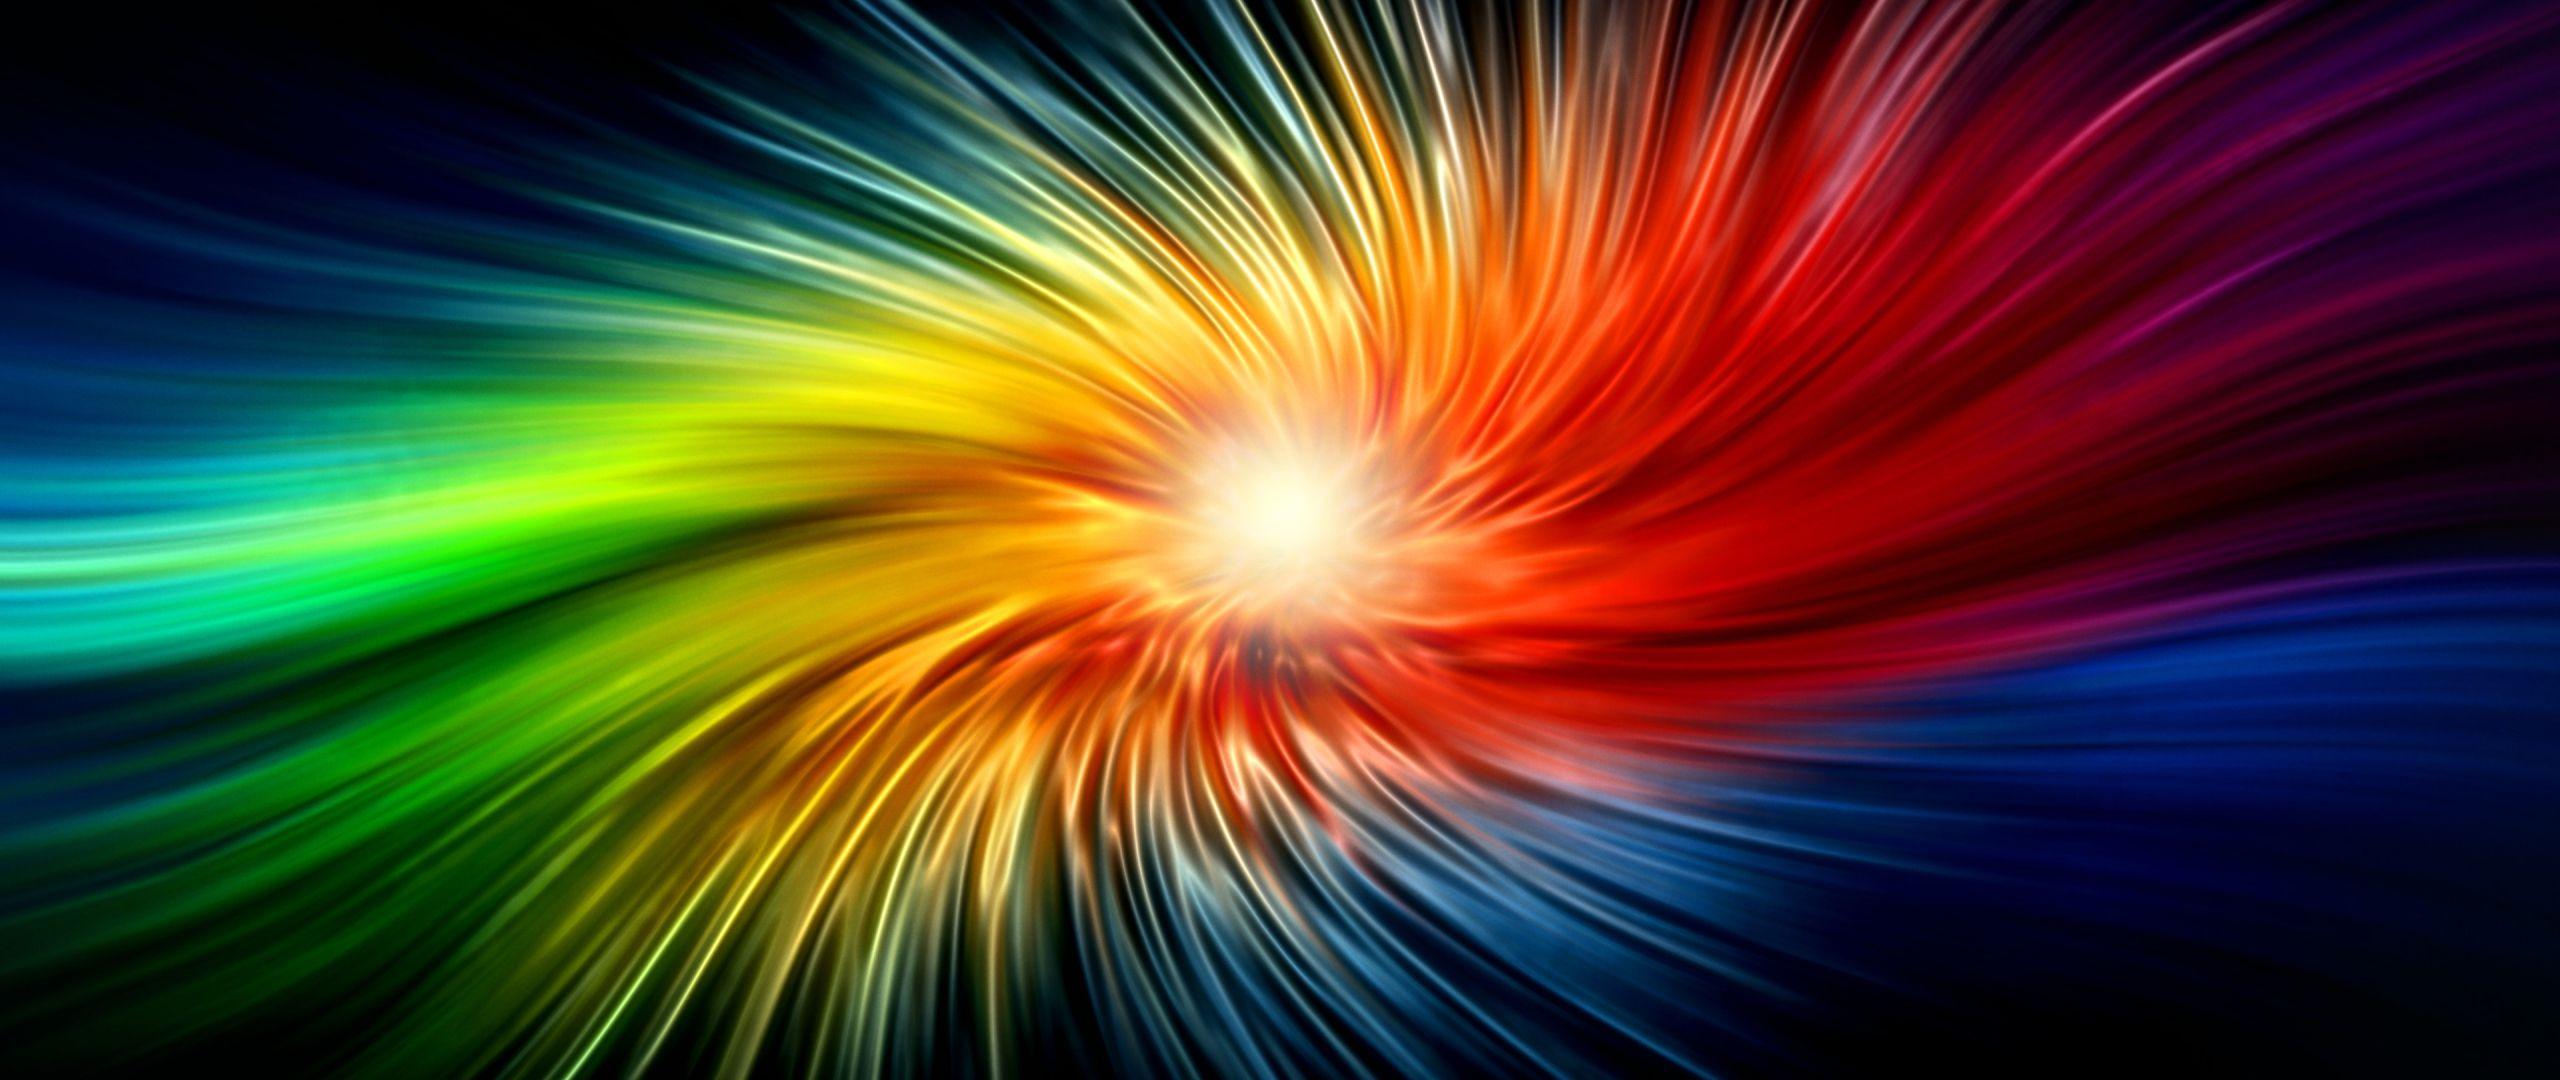 Multi Color 4k Swirl Wallpaper Hd Abstract 4k Wallpapers Images - IMAGESEE